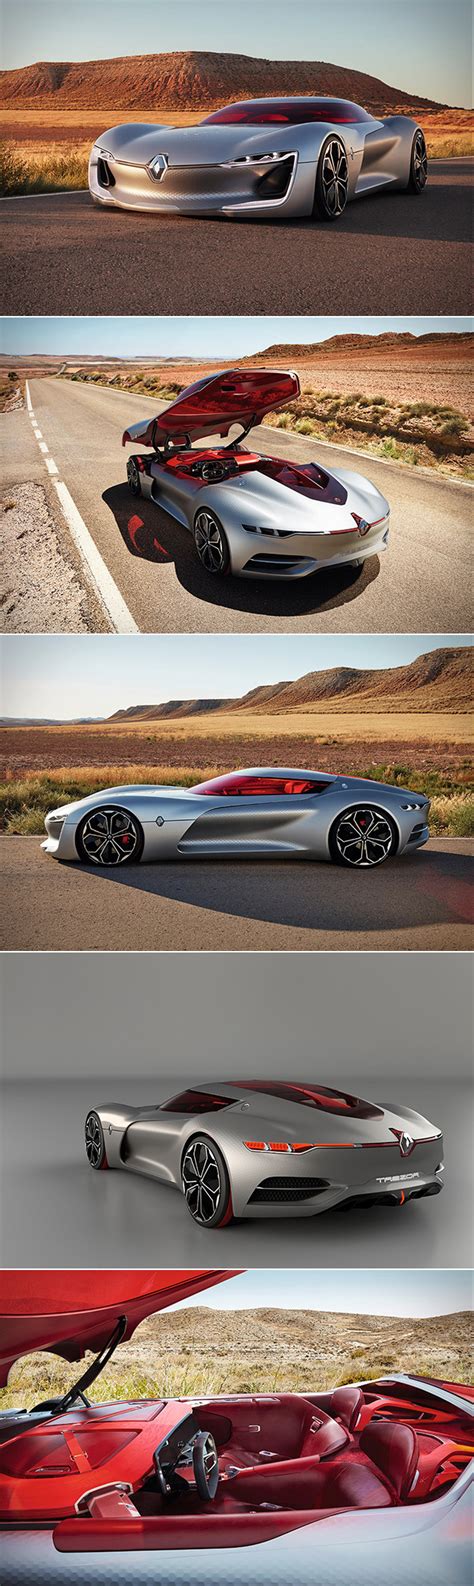 Futuristic Renault Trezor Electric GT Voted Most Beautiful Concept of 2016, Has F1-Inspired ...